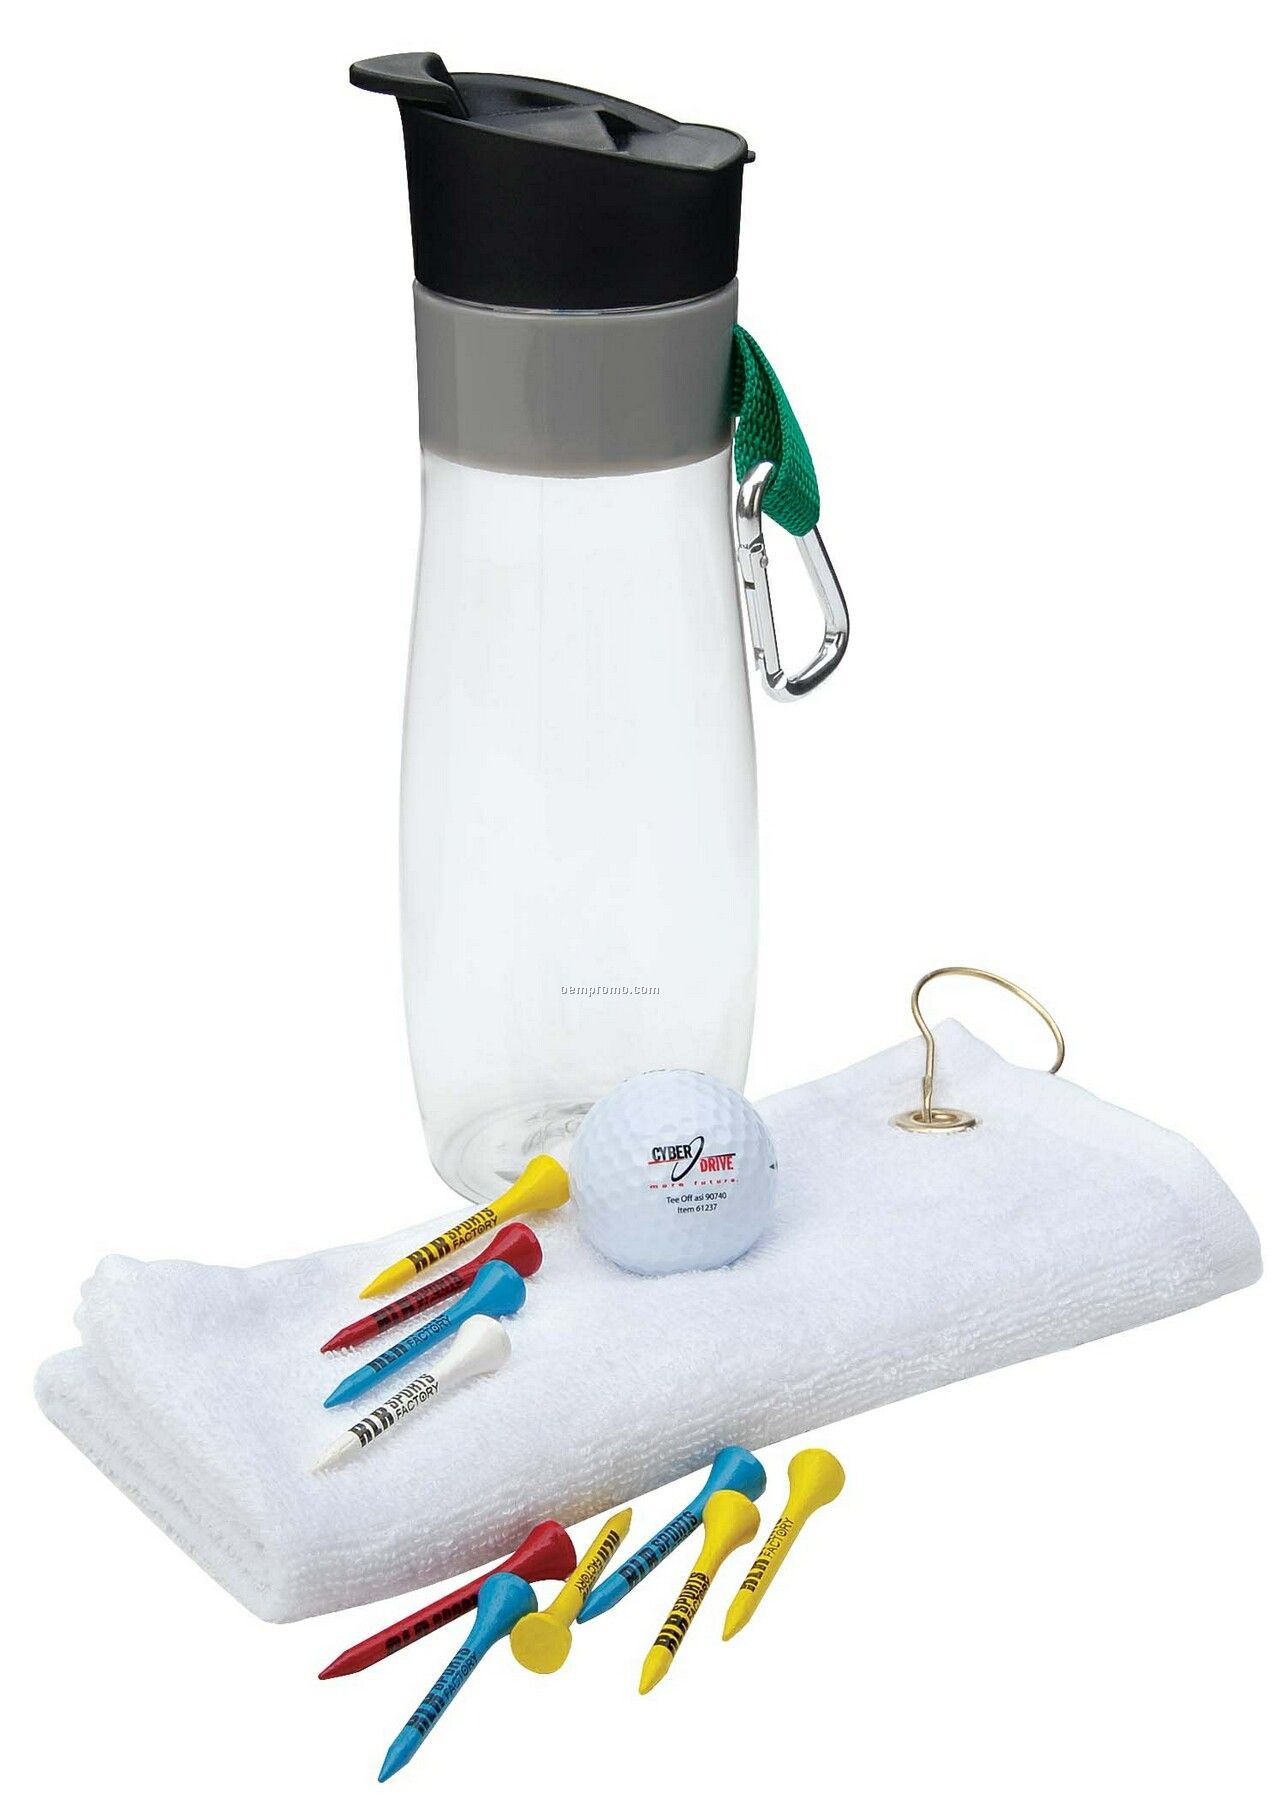 Vista Event Bottle, Wilson Ultra Ultimate Golf Ball, Tees, And Towel Kit